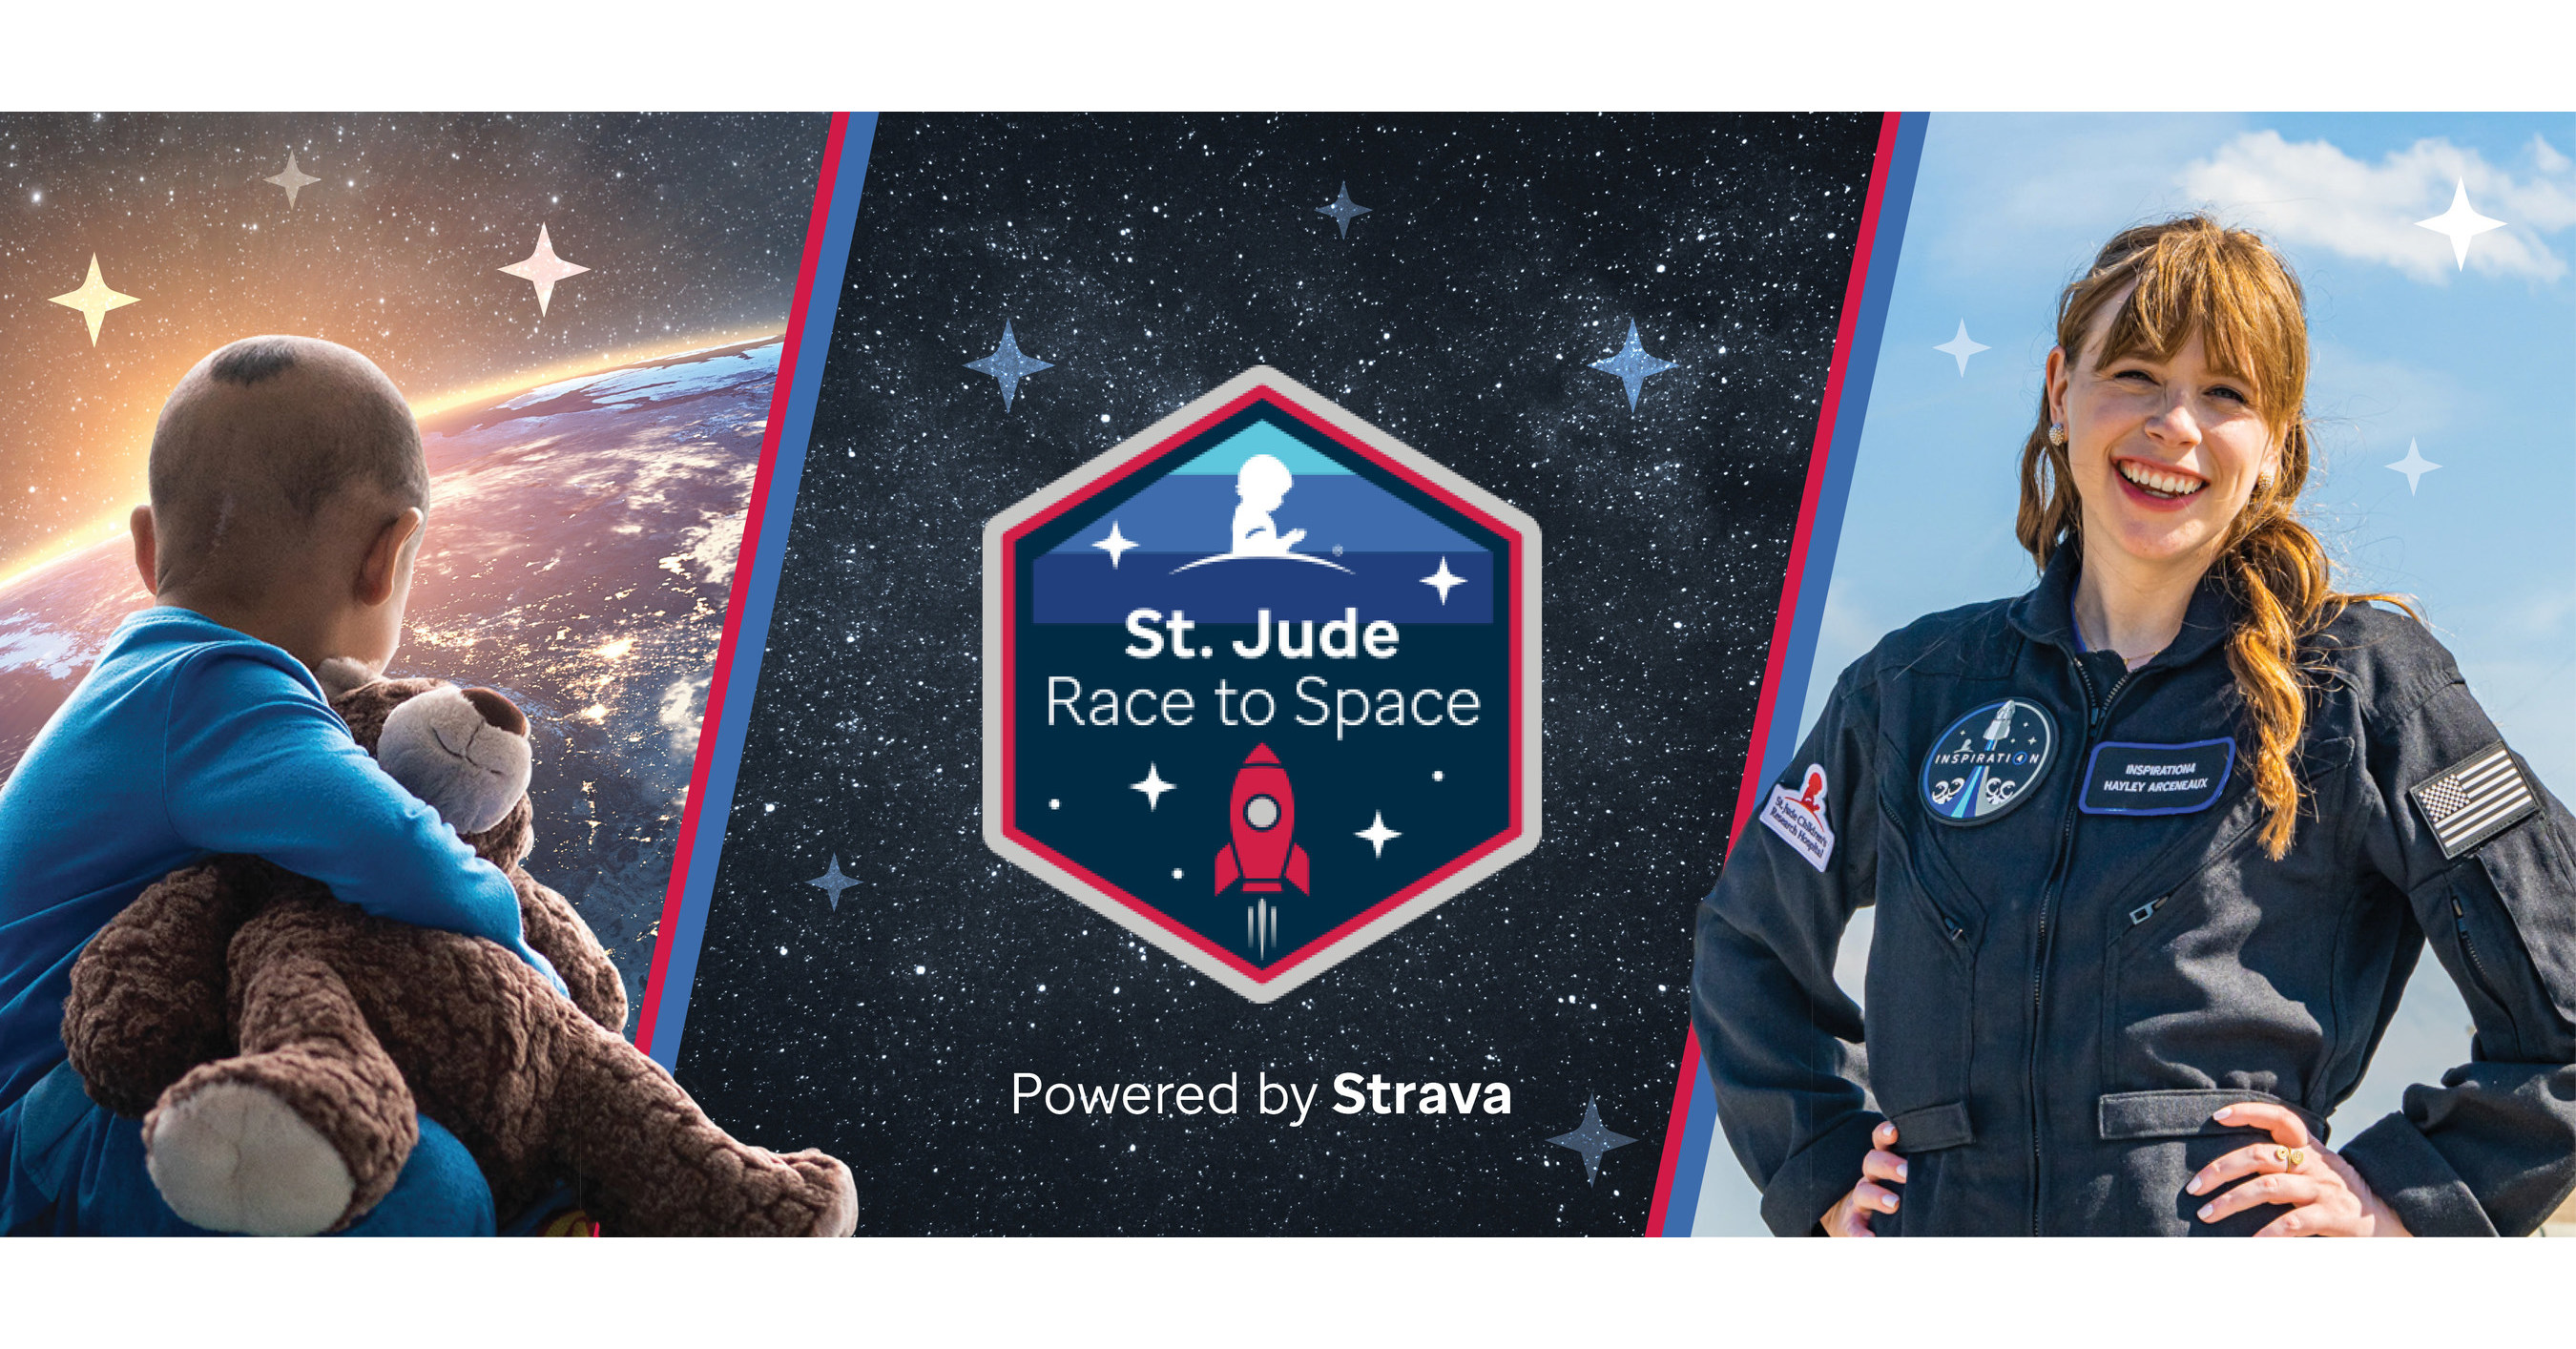 360 minutes of activity in June? No sweat! St. Jude Race to Space